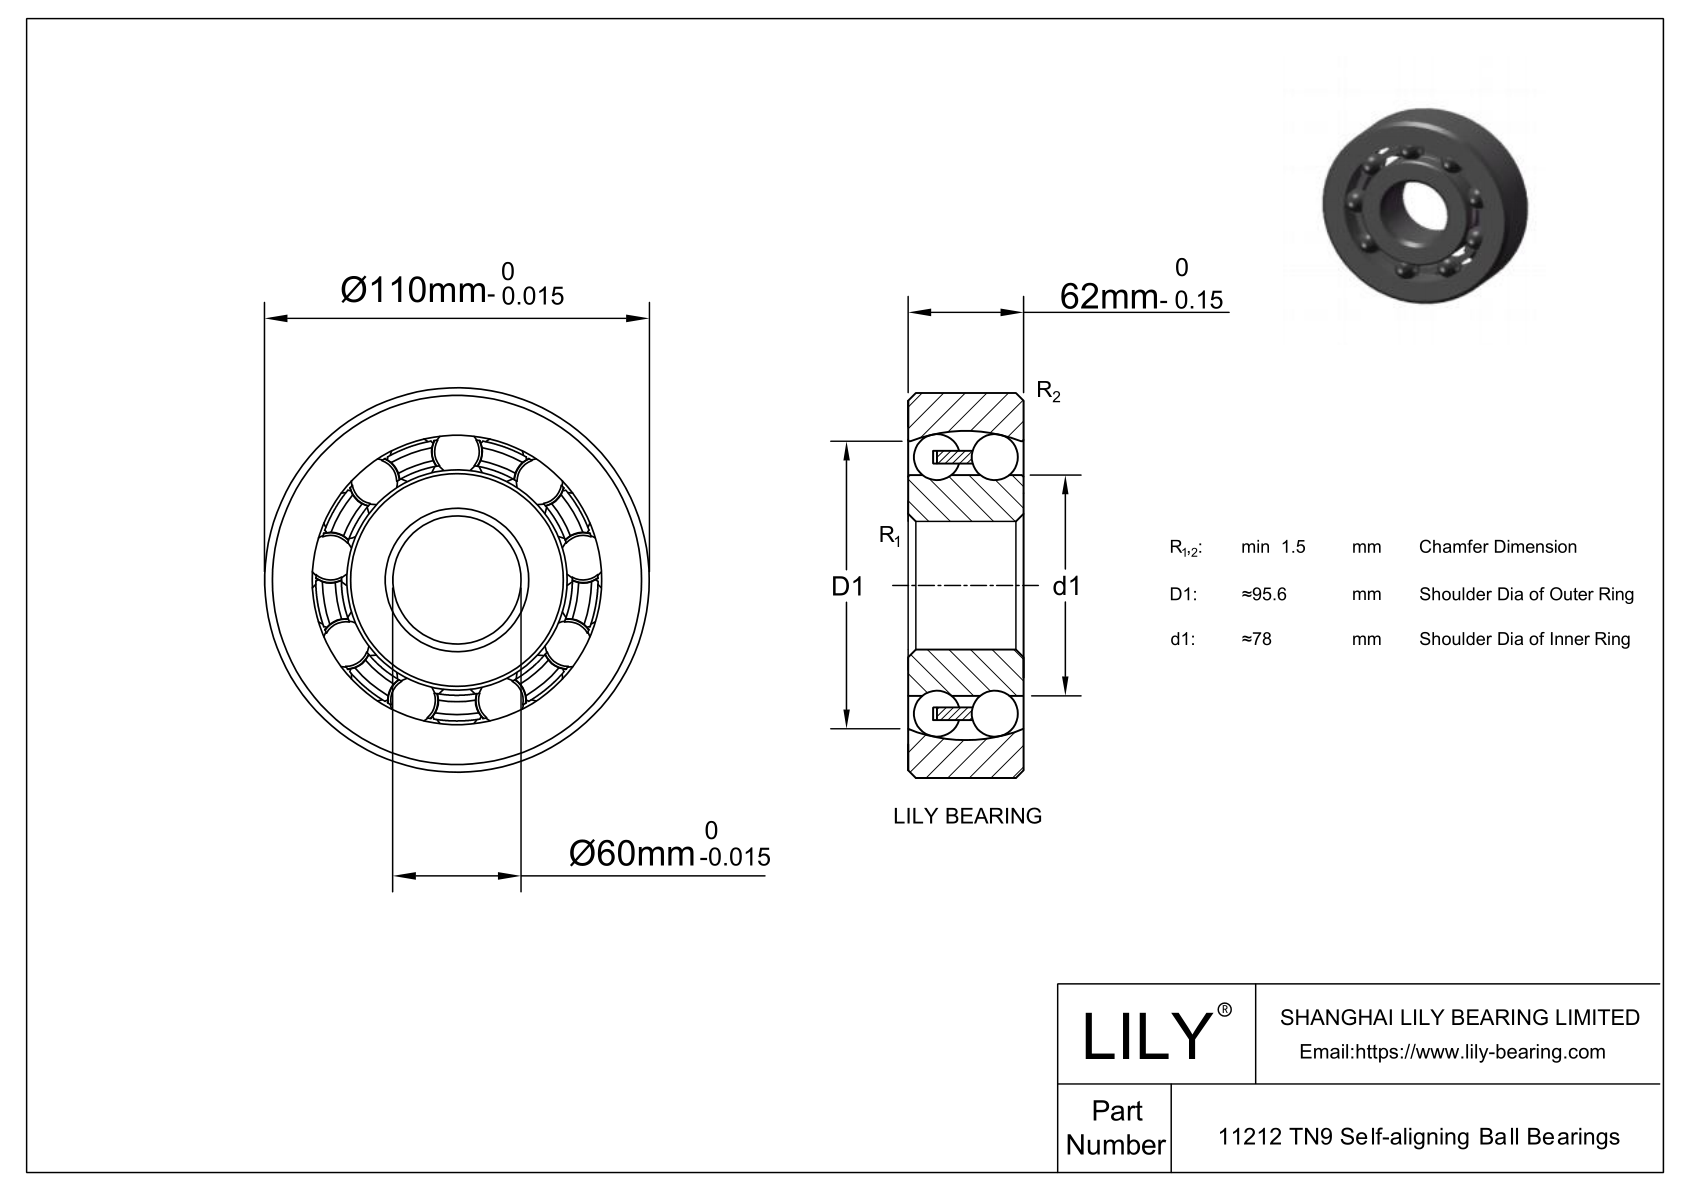 CE11212SC Silicon Carbide Self Aligning Ball Bearings cad drawing